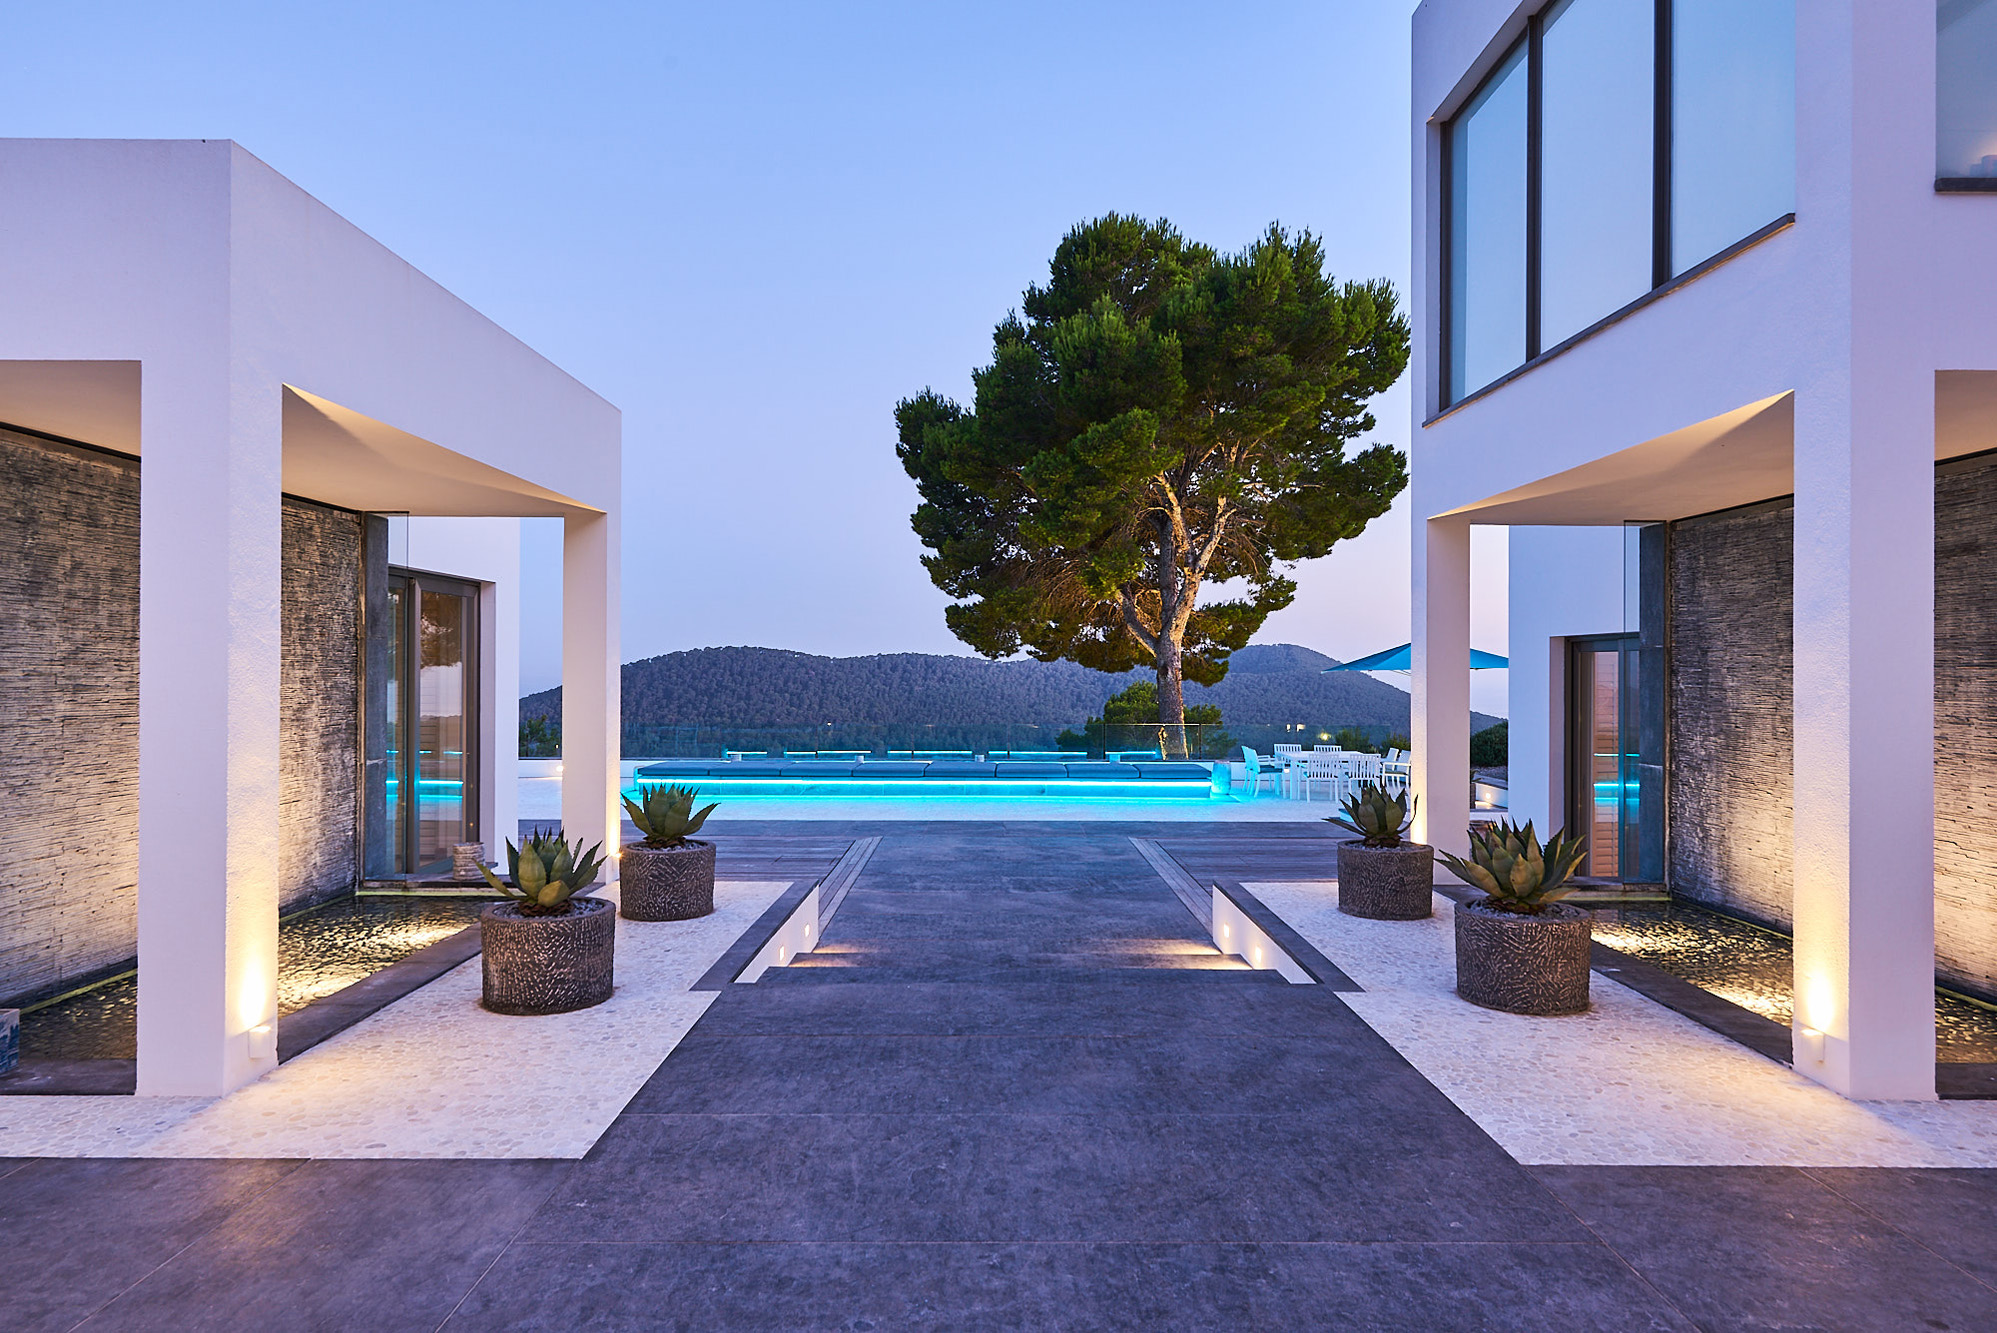 Internally lit pool casts a soft glow over the exterior of a luxury Ibiza villa at dusk